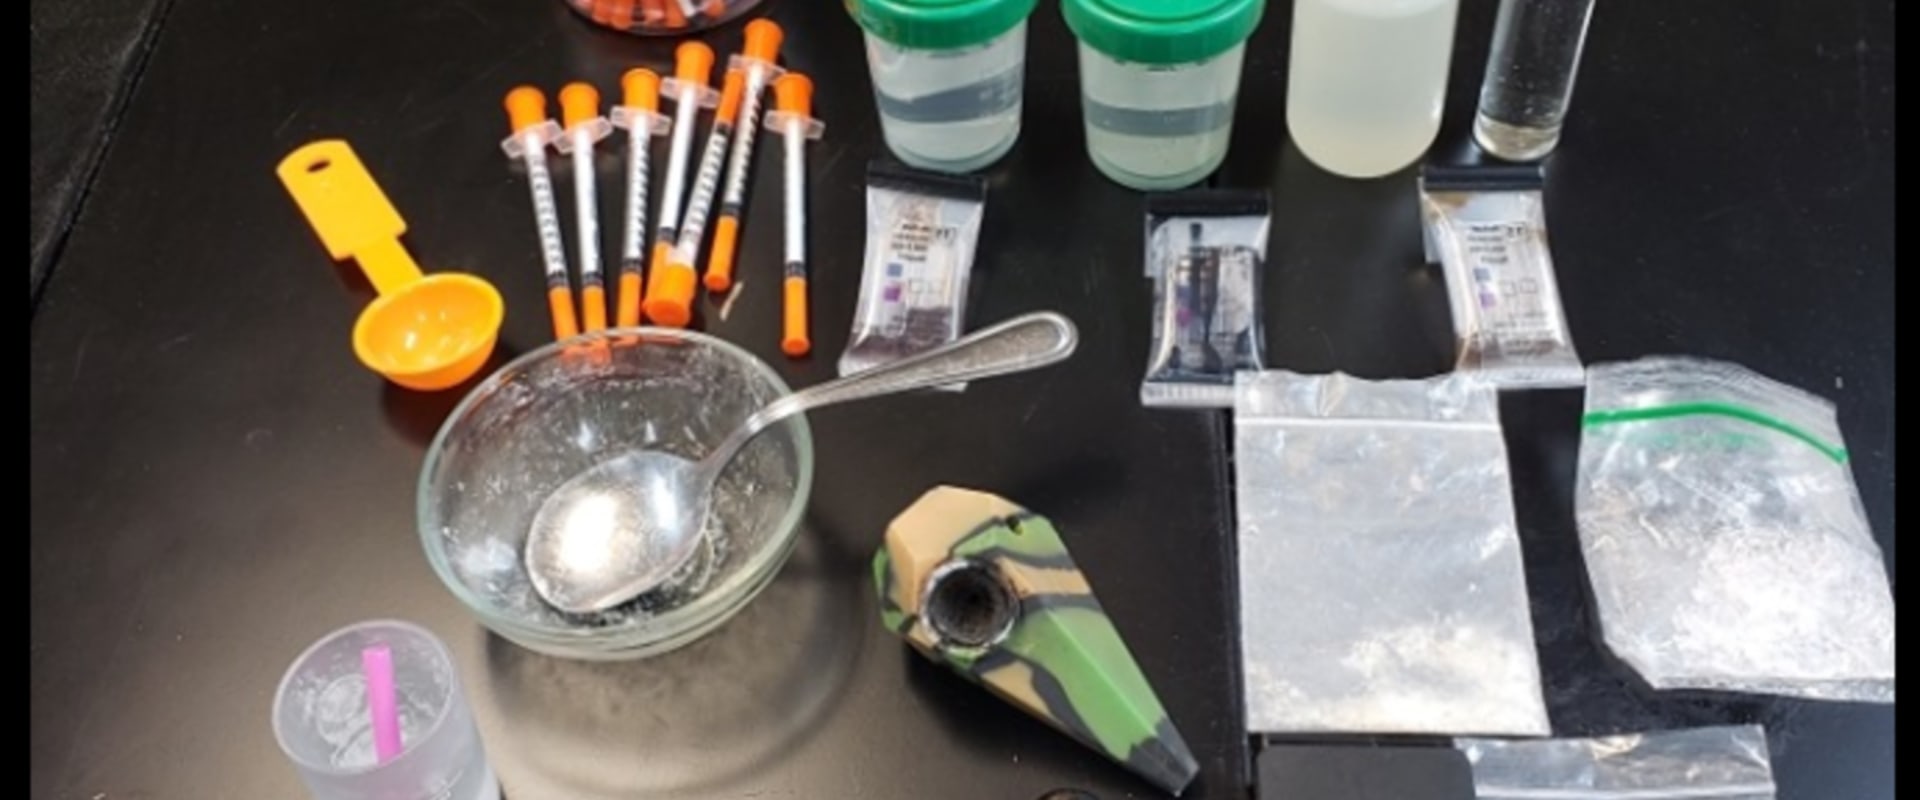 What is the charge for possession of drug paraphernalia in alabama?